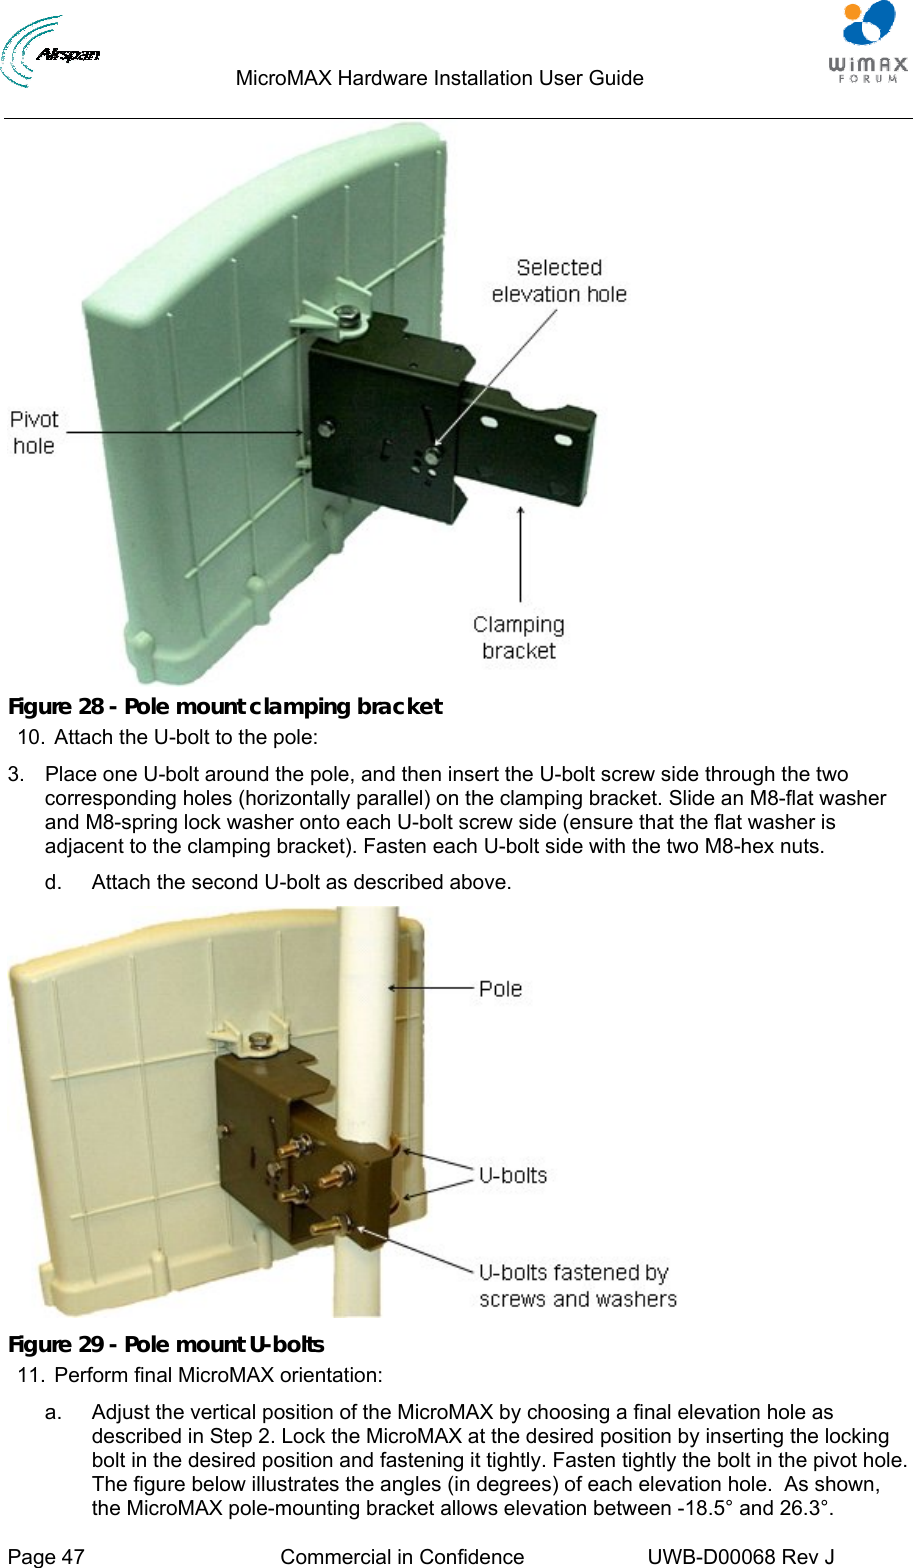                                  MicroMAX Hardware Installation User Guide     Page 47  Commercial in Confidence  UWB-D00068 Rev J    Figure 28 - Pole mount clamping bracket 10.  Attach the U-bolt to the pole: 3.  Place one U-bolt around the pole, and then insert the U-bolt screw side through the two corresponding holes (horizontally parallel) on the clamping bracket. Slide an M8-flat washer and M8-spring lock washer onto each U-bolt screw side (ensure that the flat washer is adjacent to the clamping bracket). Fasten each U-bolt side with the two M8-hex nuts. d.  Attach the second U-bolt as described above.  Figure 29 - Pole mount U-bolts 11.  Perform final MicroMAX orientation: a.  Adjust the vertical position of the MicroMAX by choosing a final elevation hole as described in Step 2. Lock the MicroMAX at the desired position by inserting the locking bolt in the desired position and fastening it tightly. Fasten tightly the bolt in the pivot hole. The figure below illustrates the angles (in degrees) of each elevation hole.  As shown, the MicroMAX pole-mounting bracket allows elevation between -18.5° and 26.3°. 